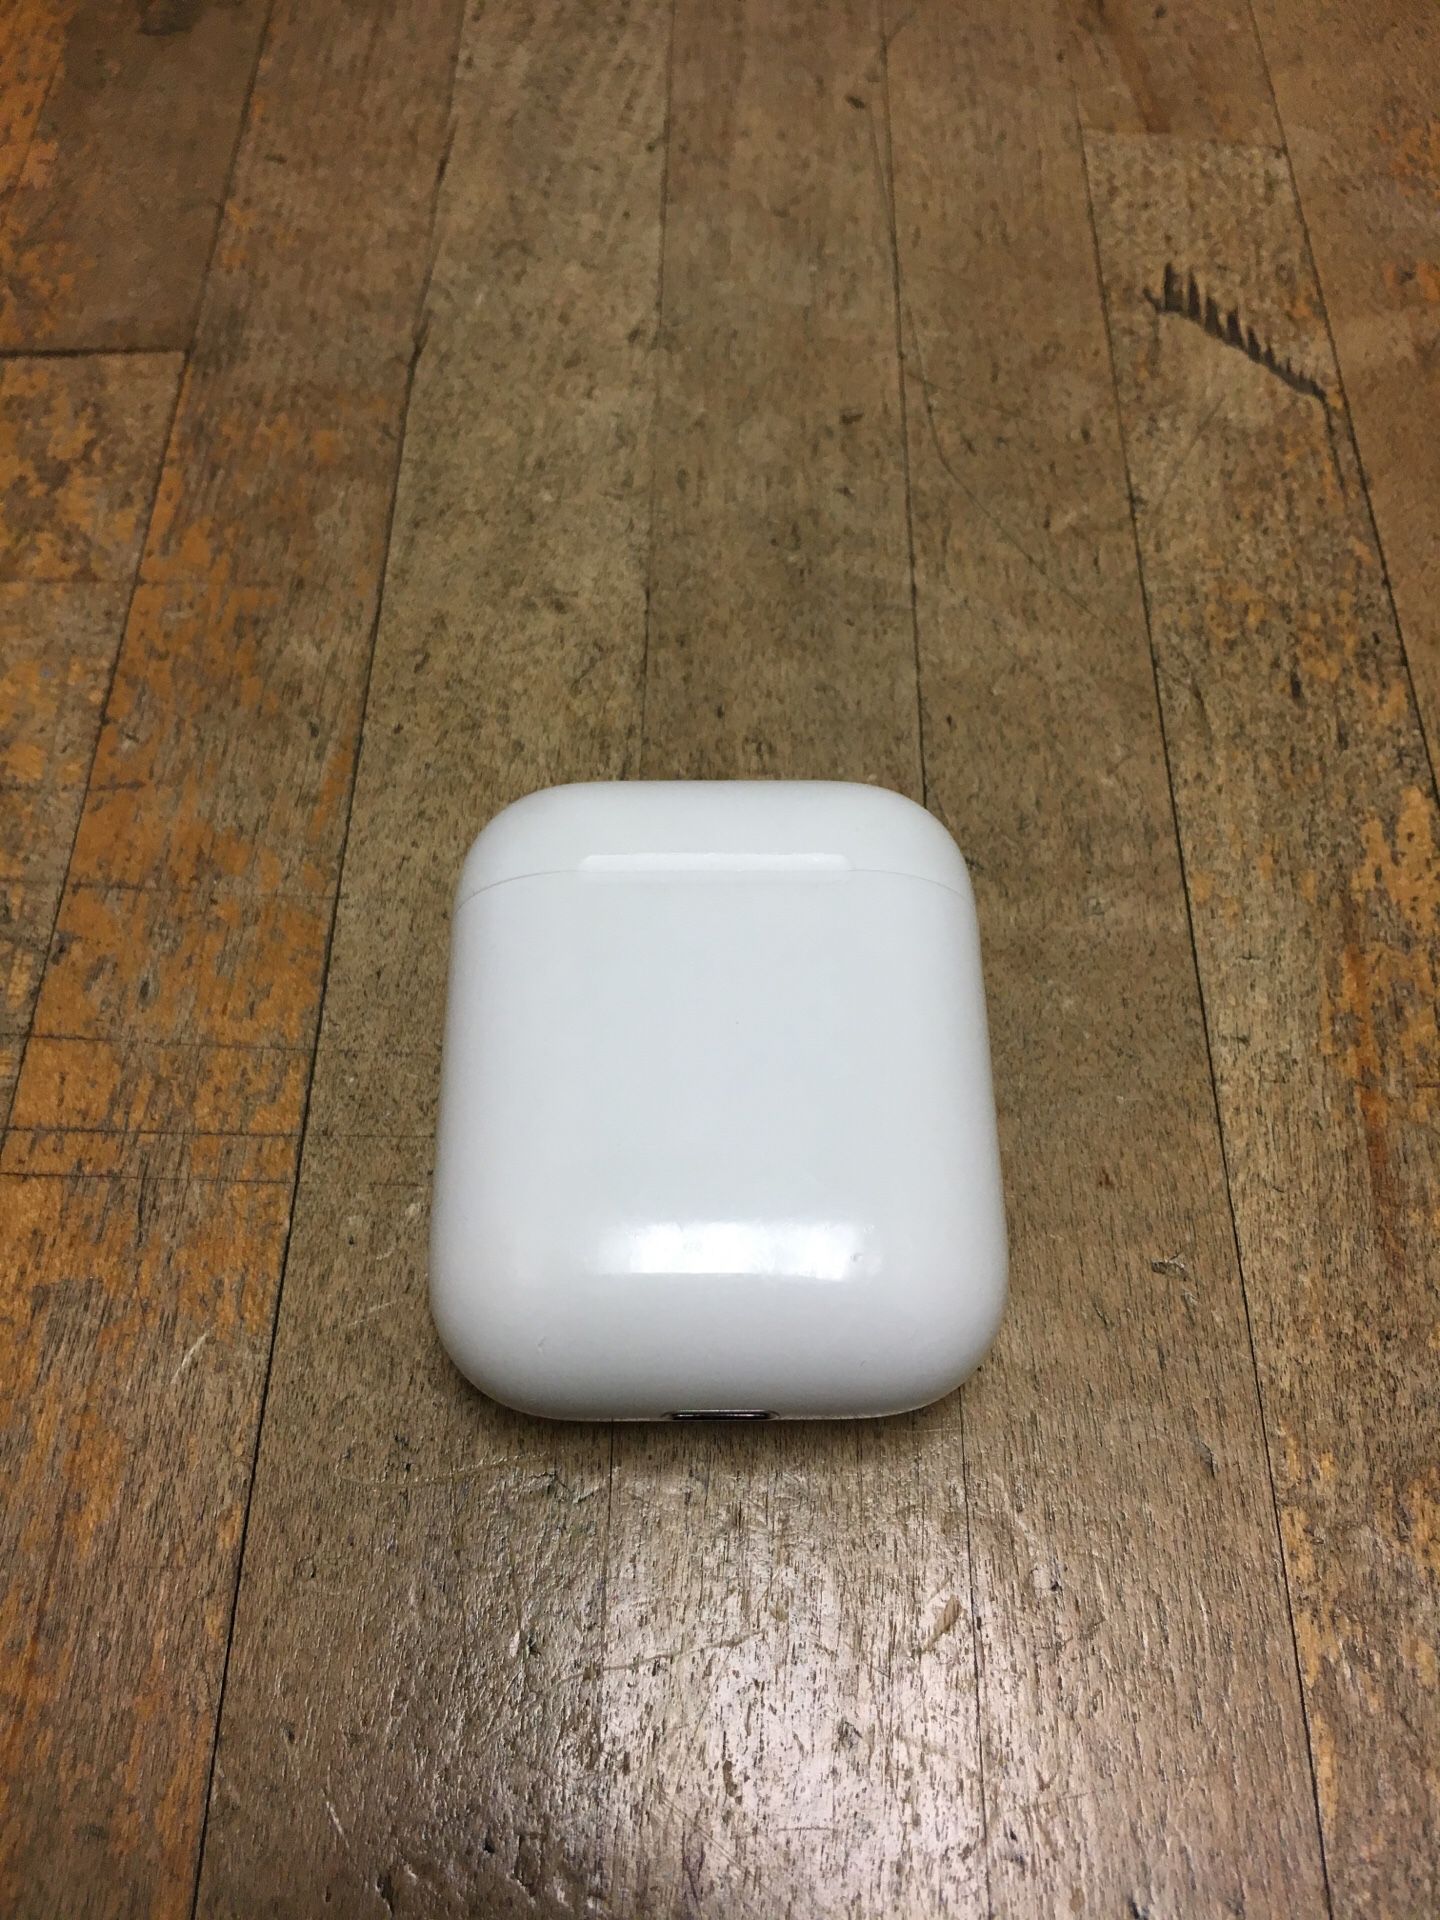 AirPods charging case ONLY